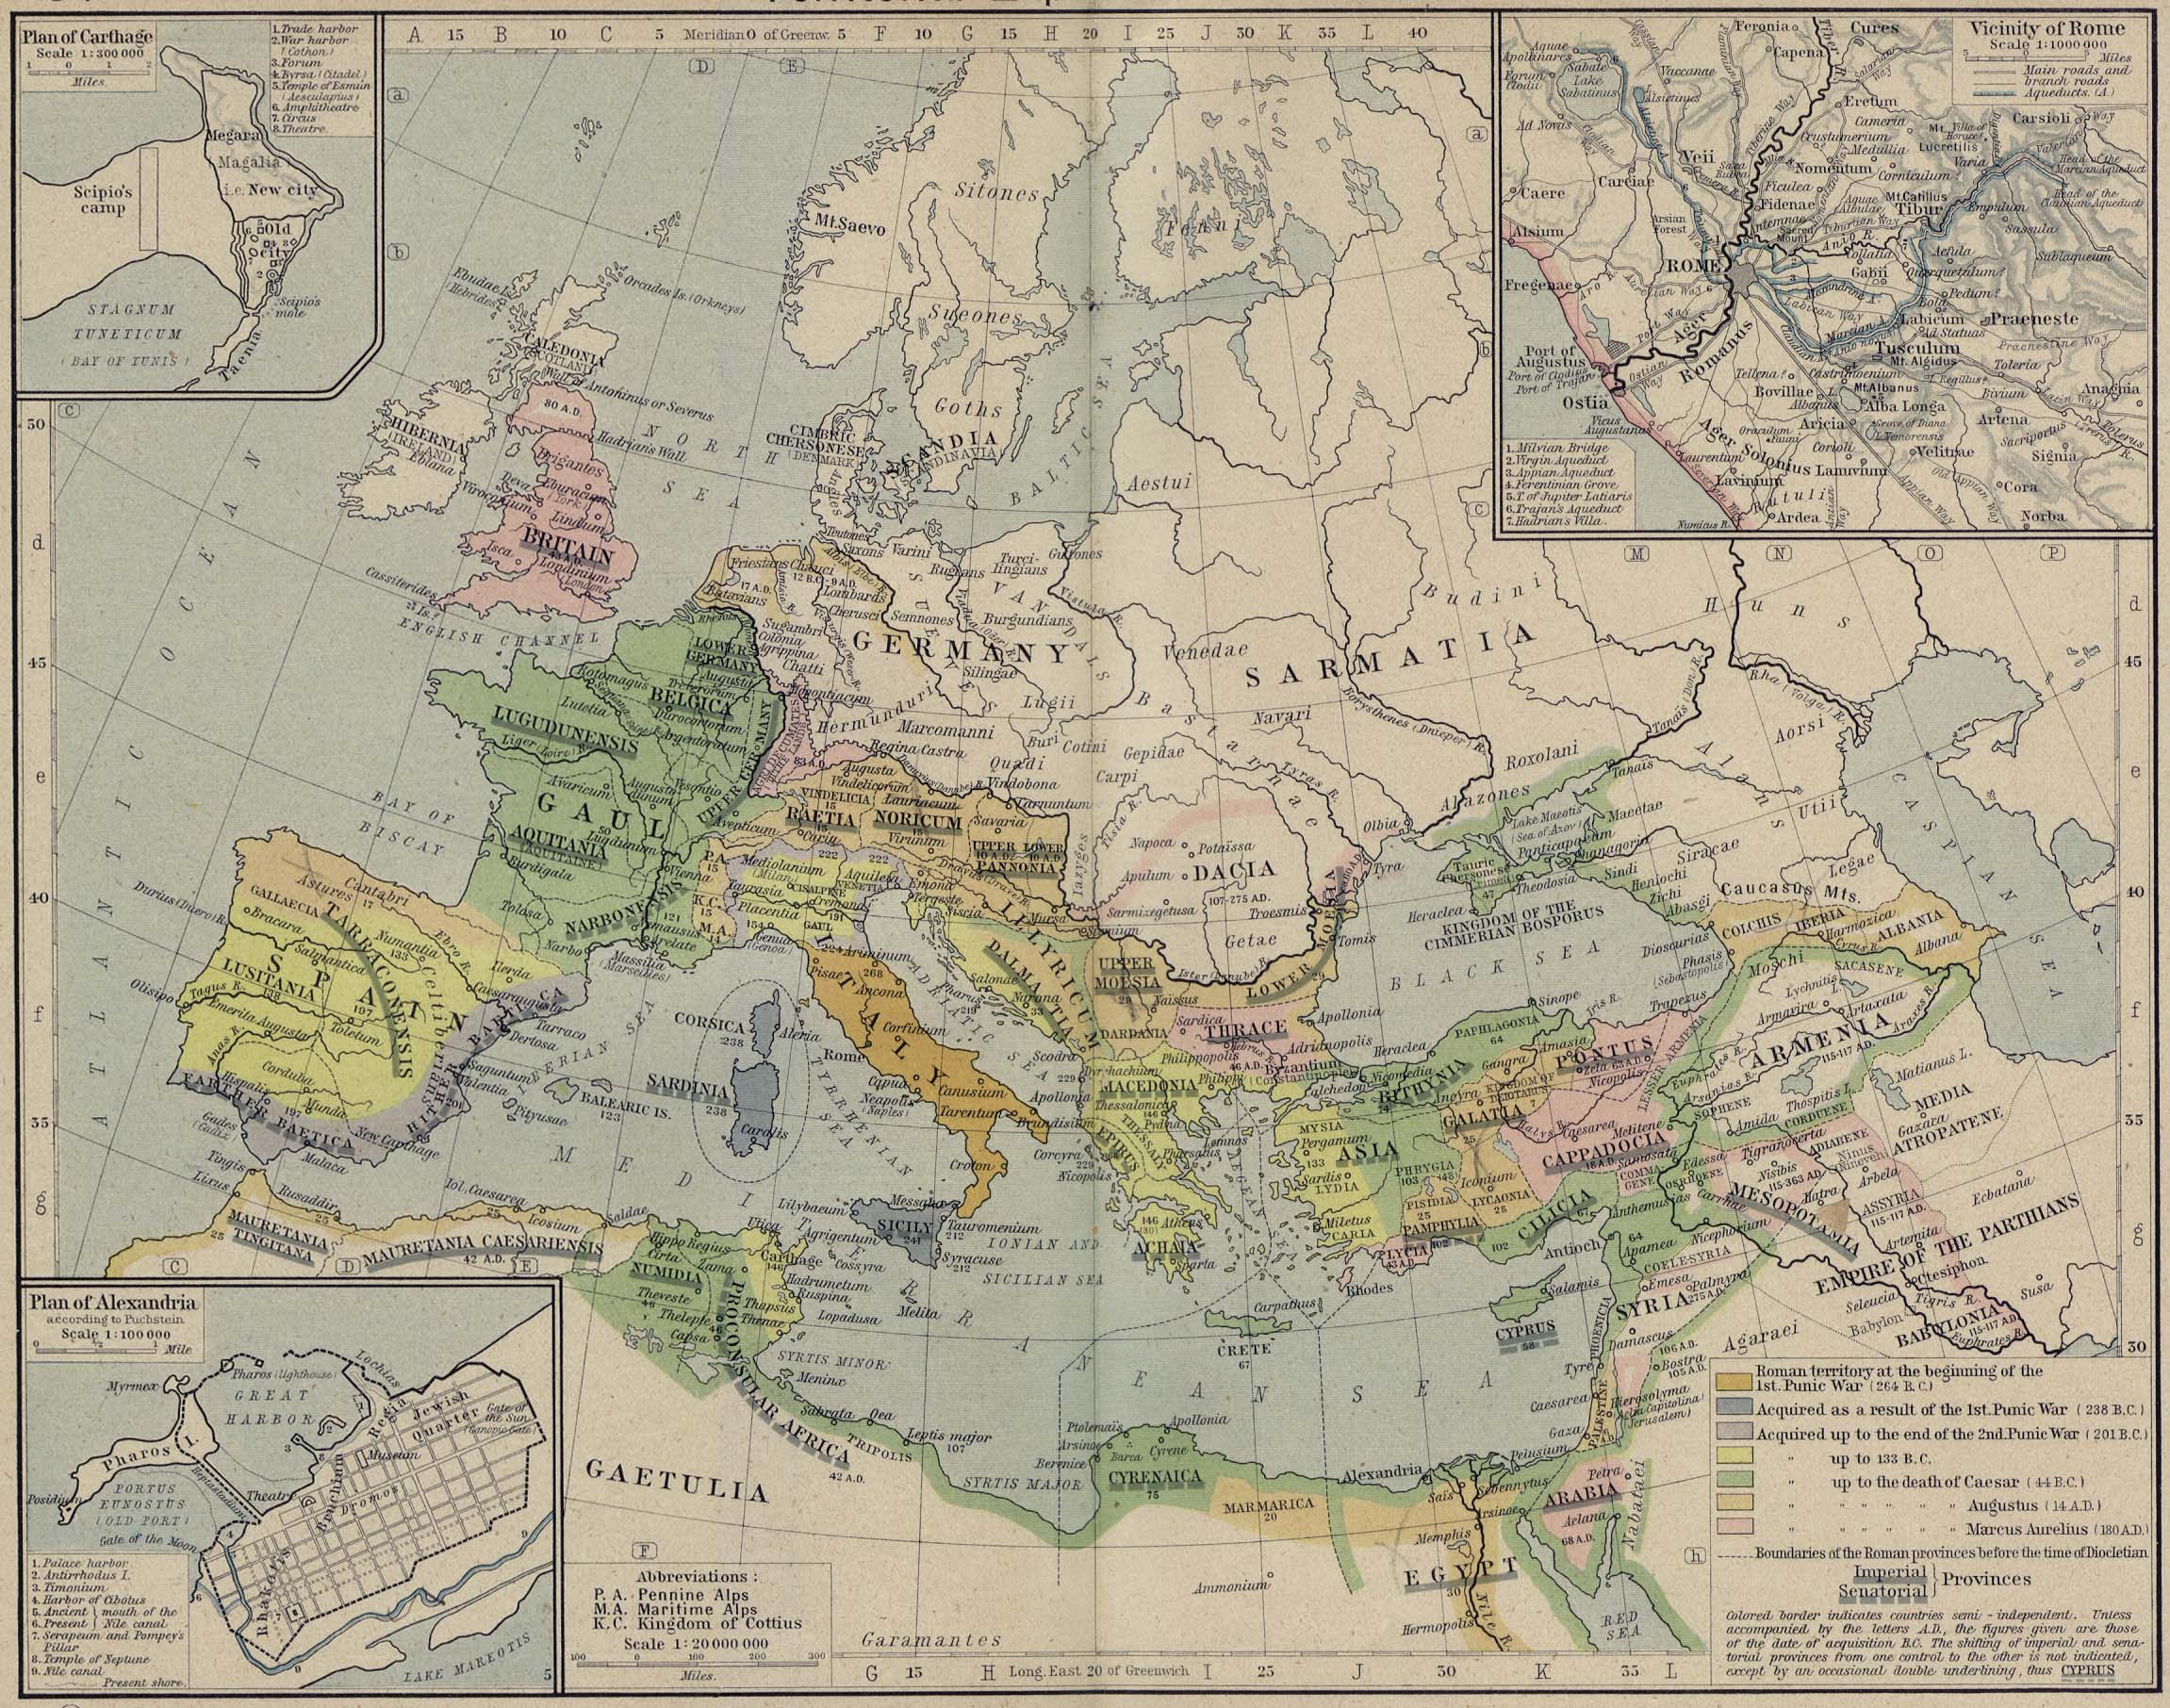 Map of Roman Empire264 BC - AD 180with insets of Alexandria, Carthage, and Rome